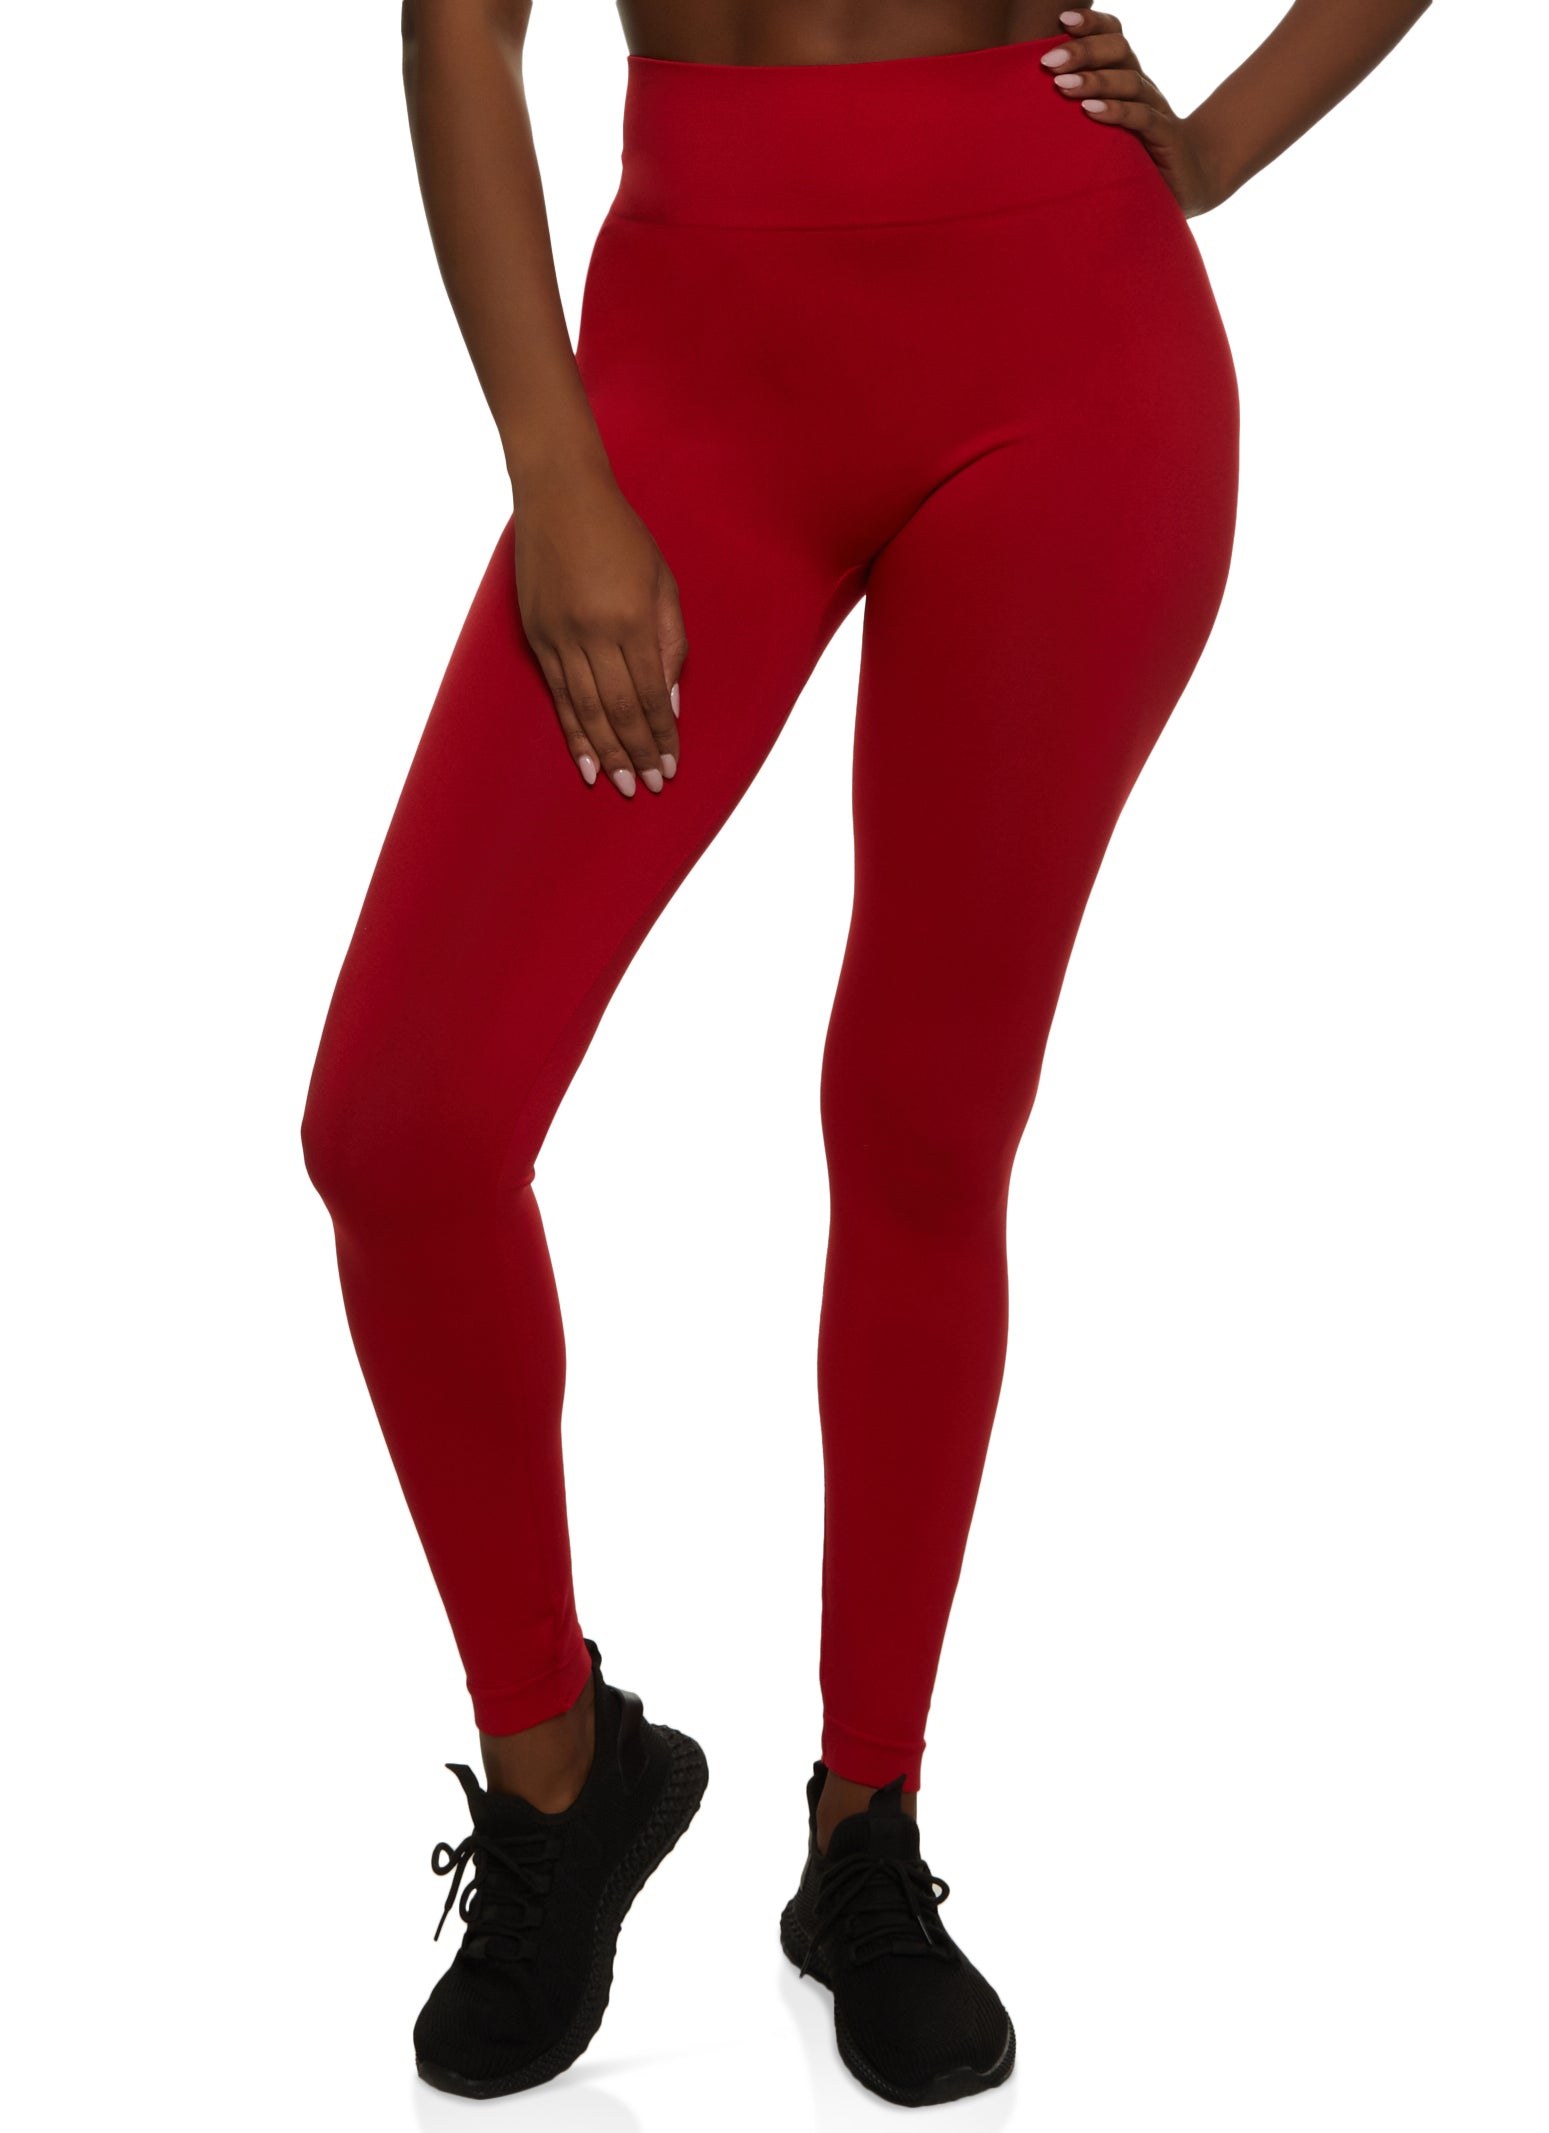 Women's Super Low Rise Leggings With 5 Zippers and Faux Zipper